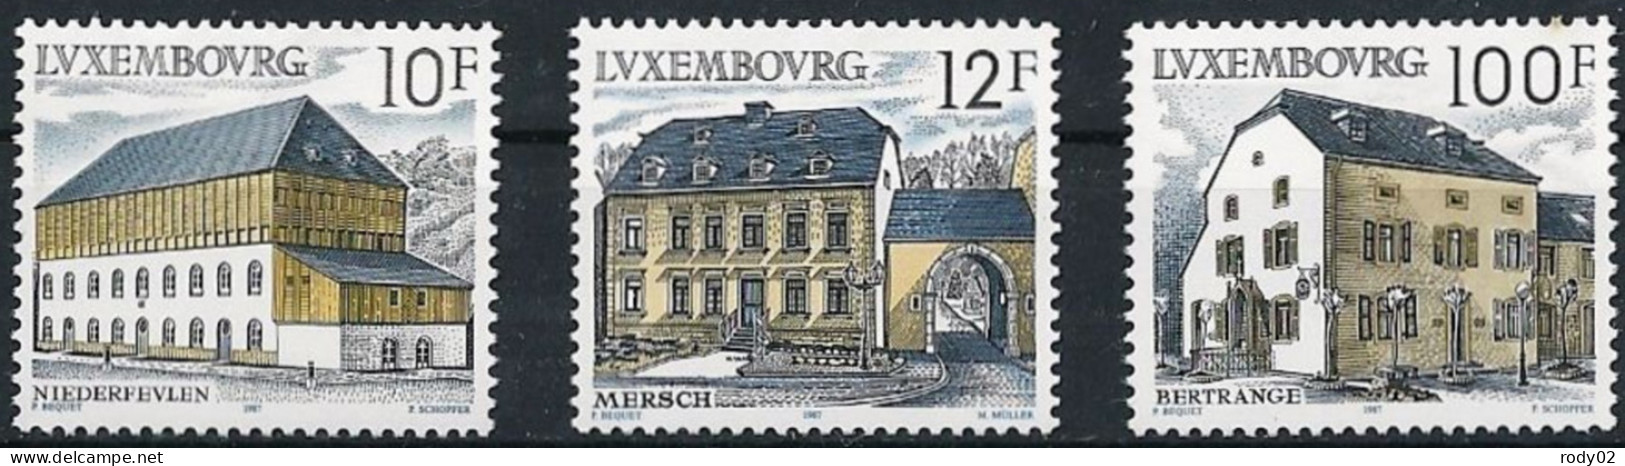 LUXEMBOURG - ARCHITECTURE - N° 1130 A 1132 ET CARNET N° 1338 - NEUF** MNH - Libretti